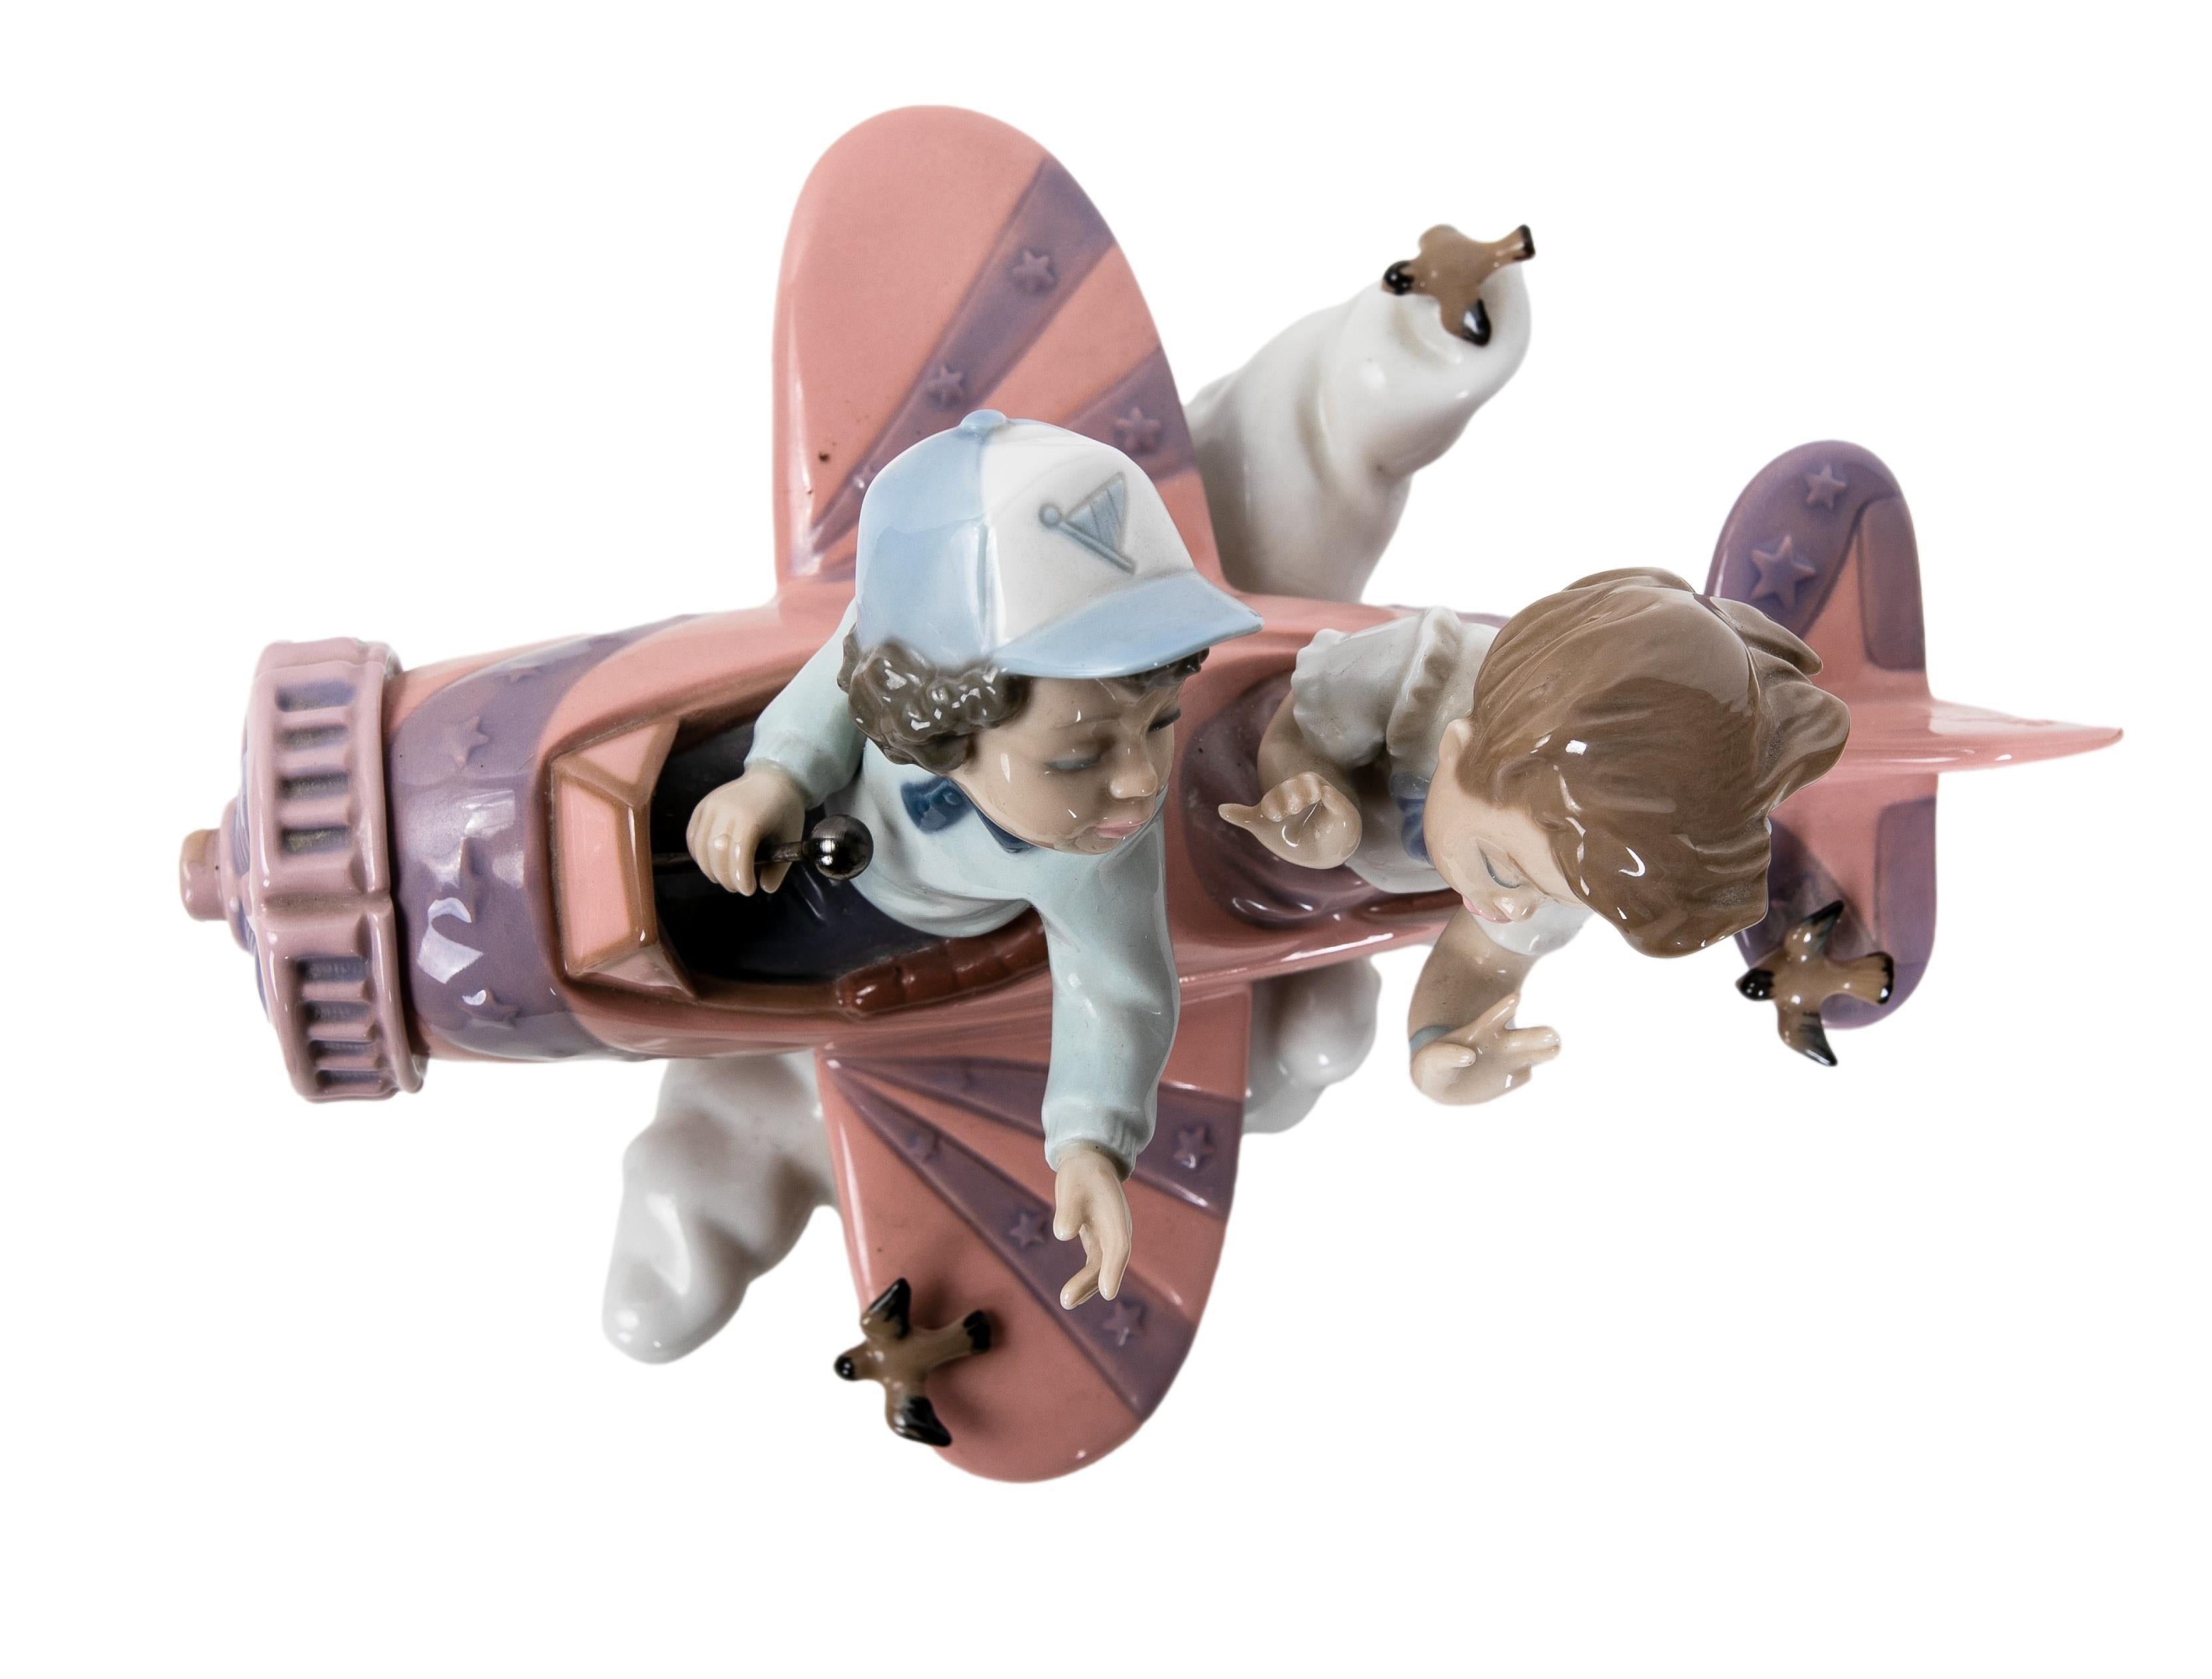 1989 Porcelain Figure of Children in Airplane Signed by the House of LLadró For Sale 3